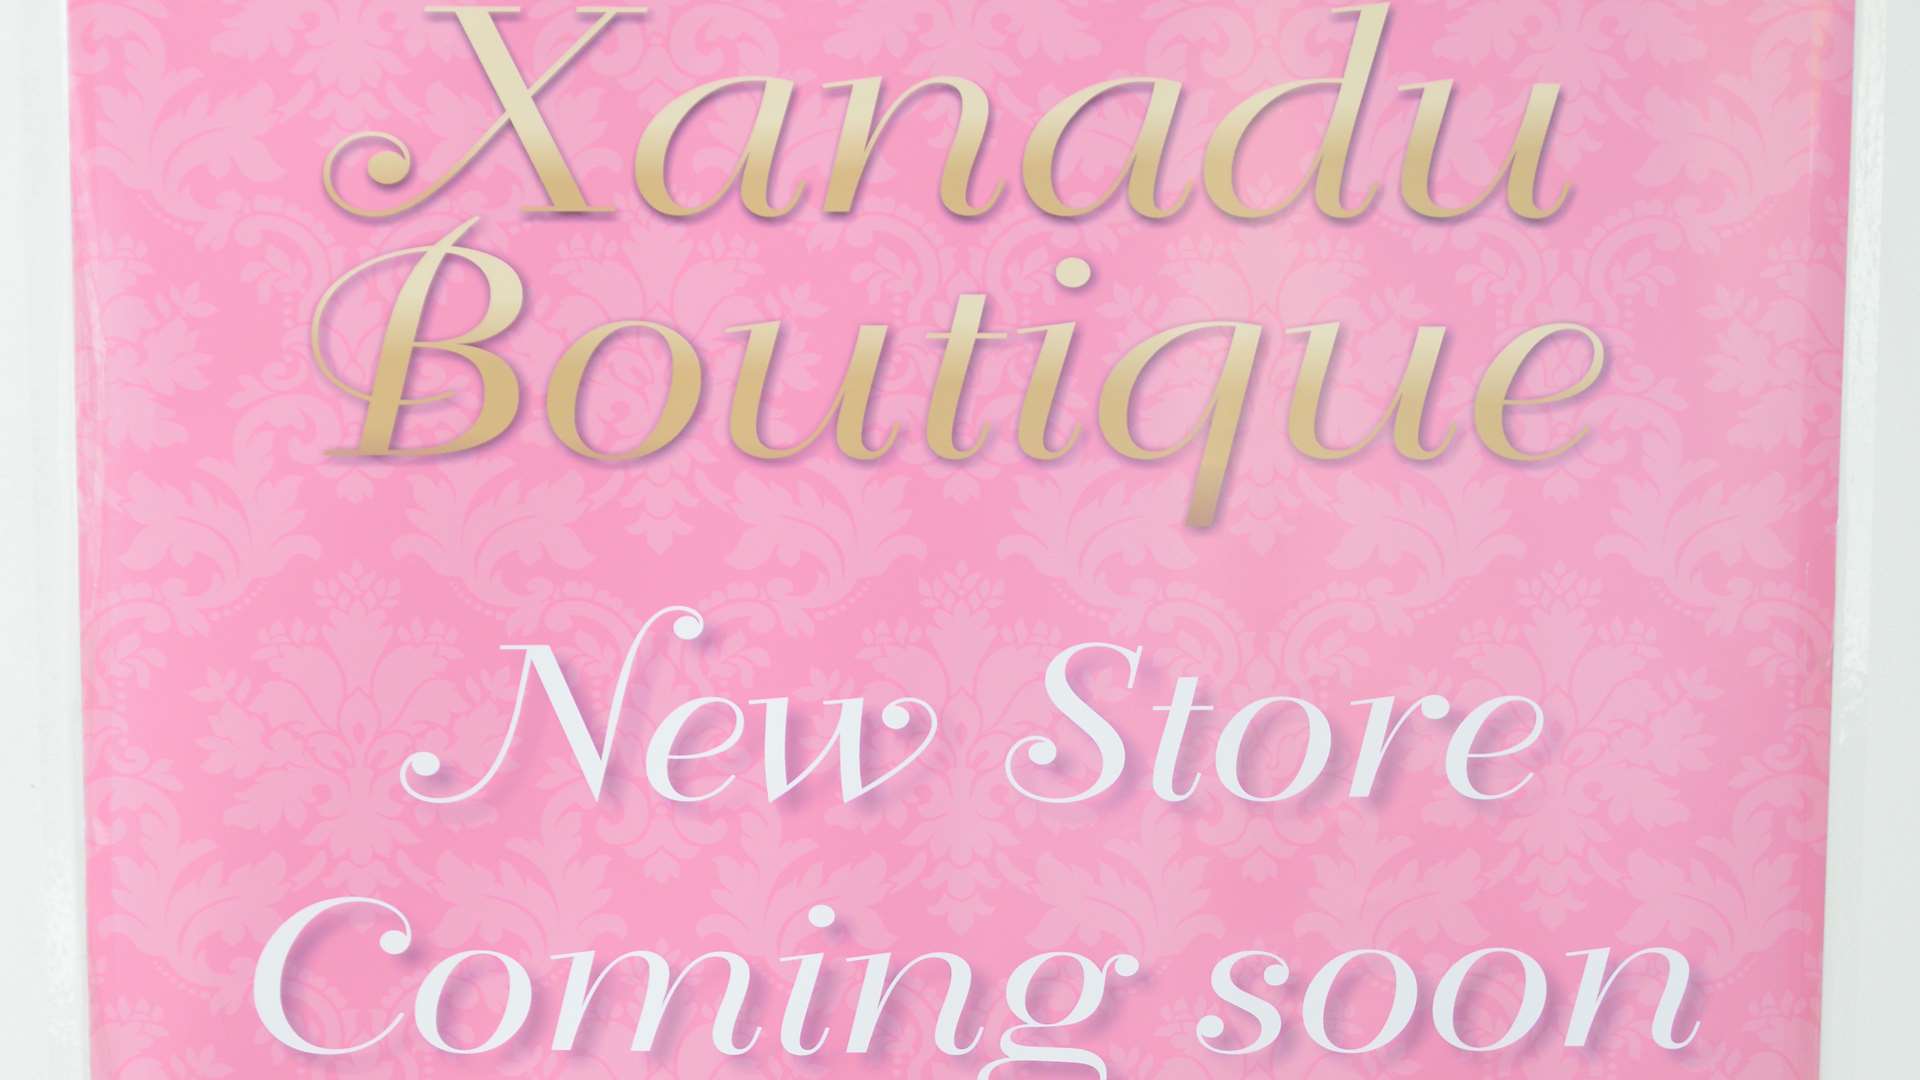 The new shop will stock lingerie, bikinis and summer dresses